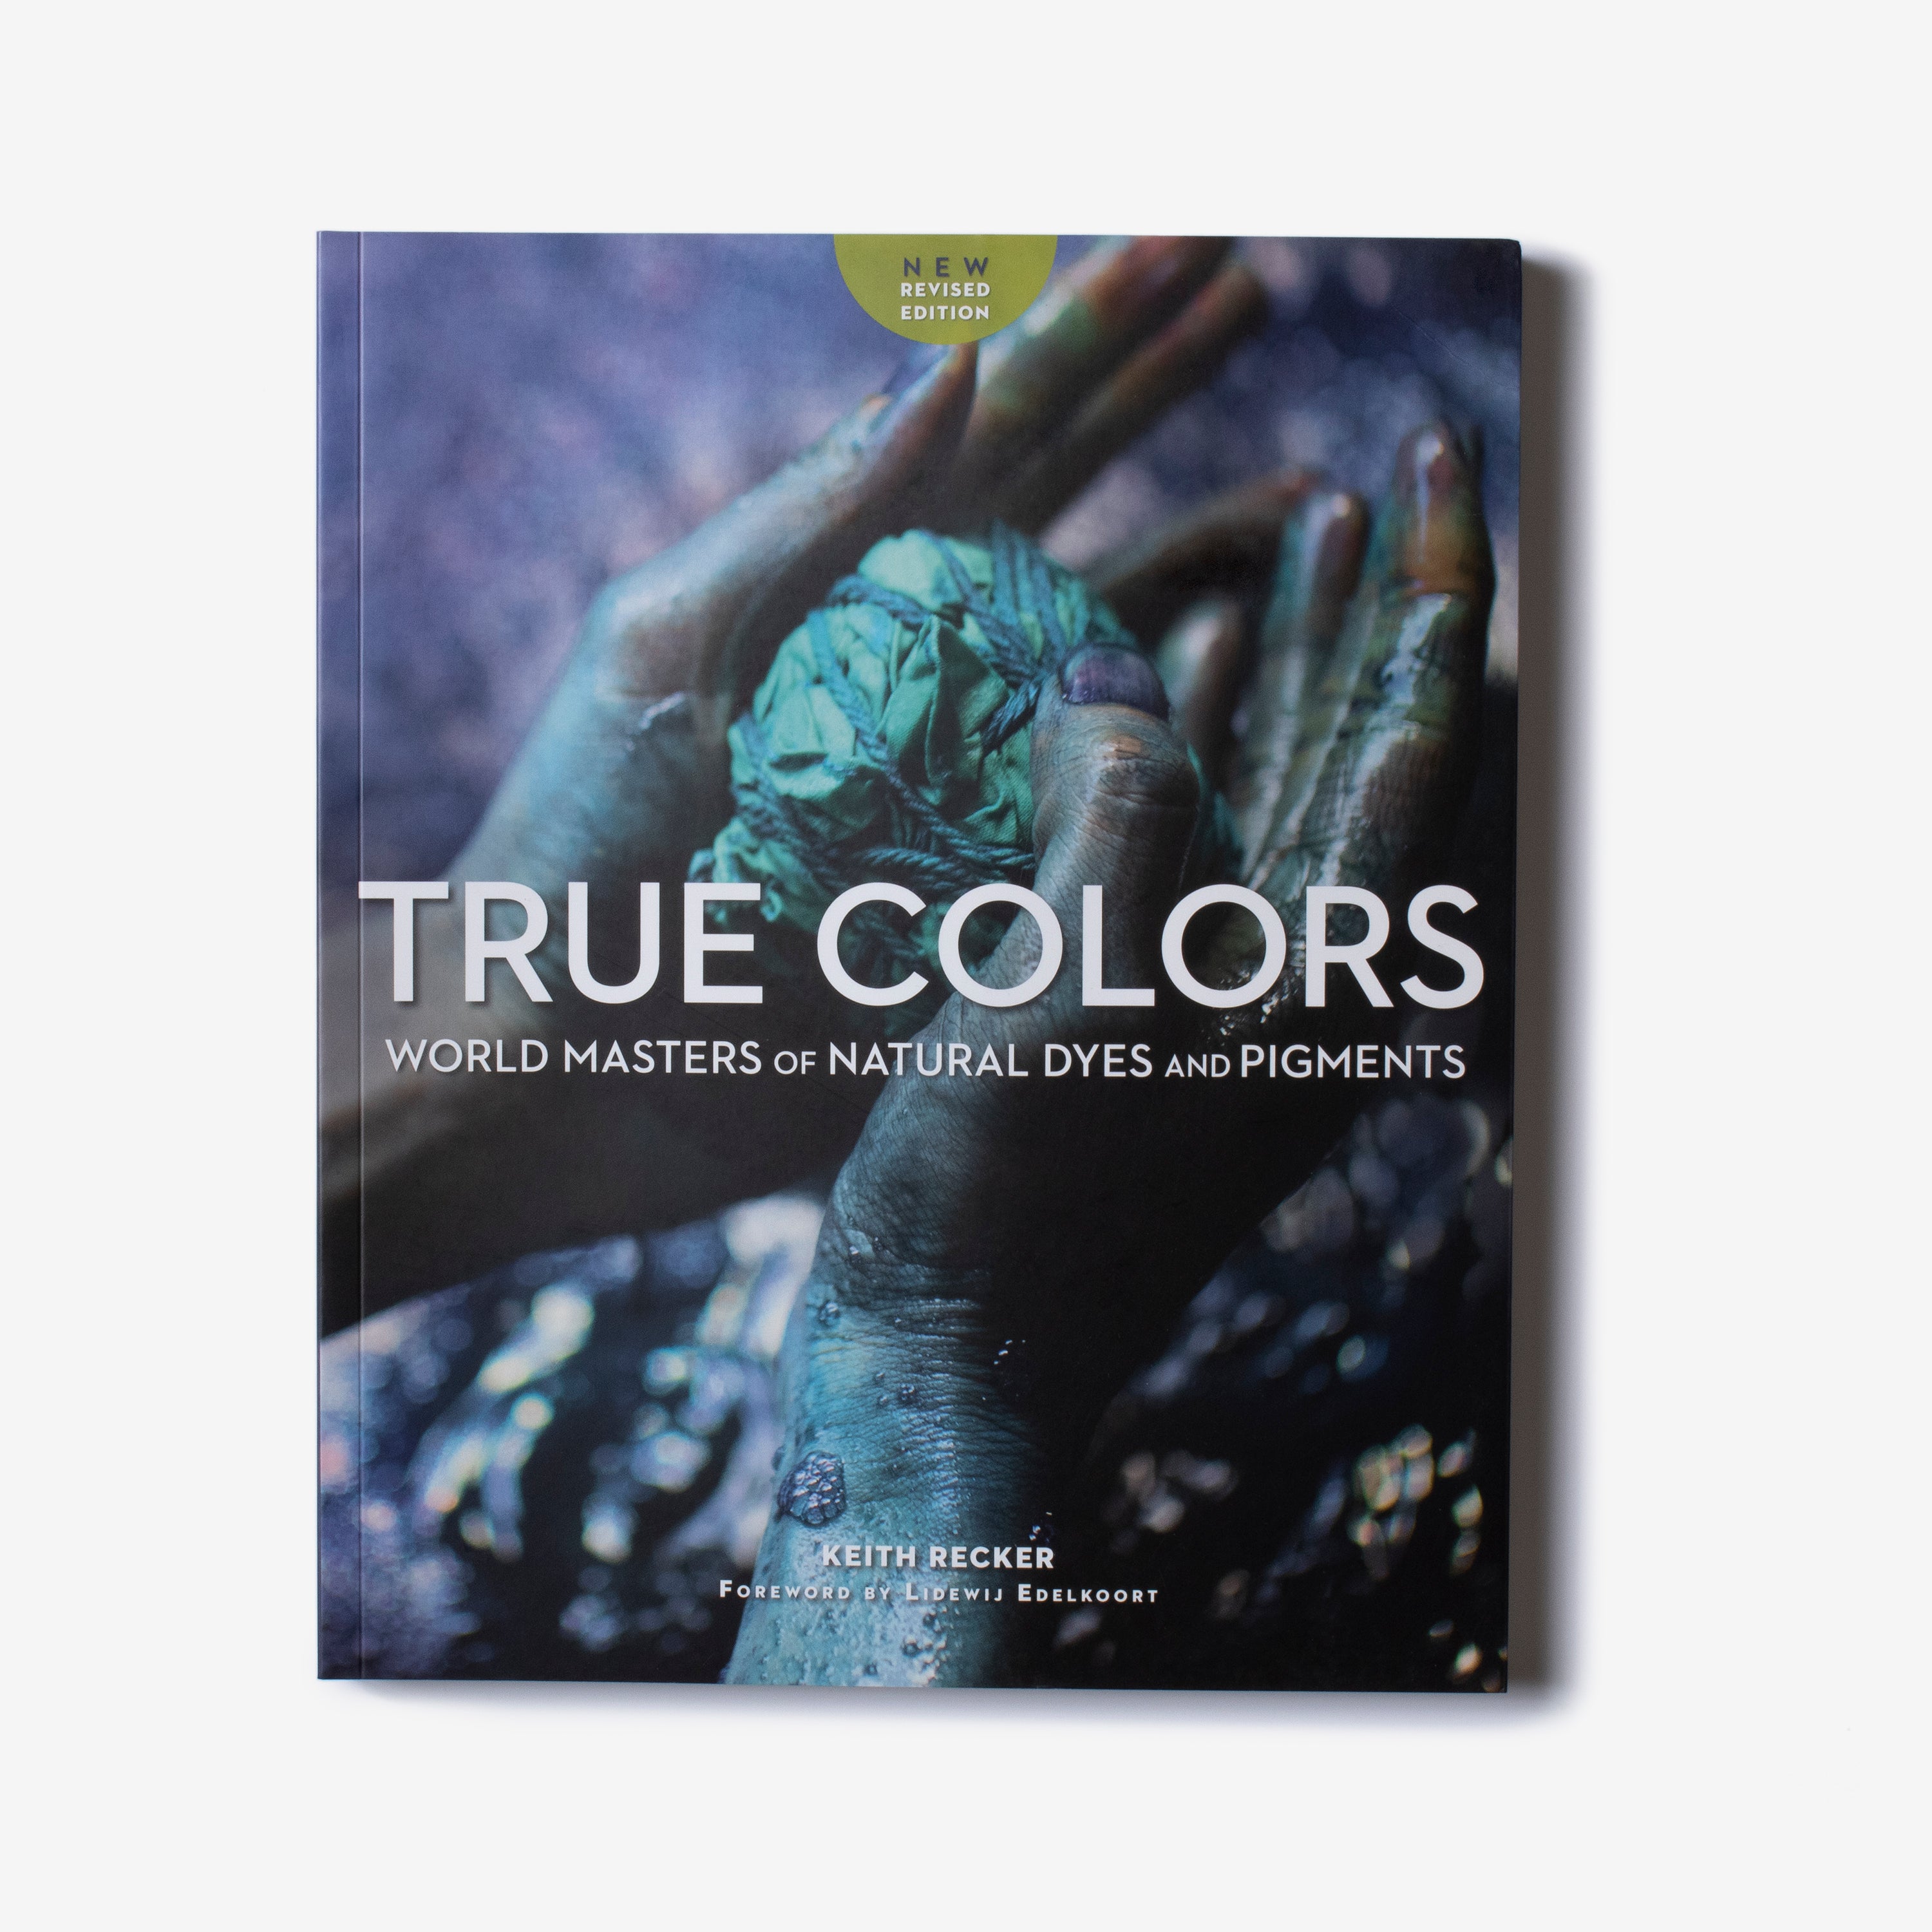 true colors: world masters of natural dyes and pigments (new edition)